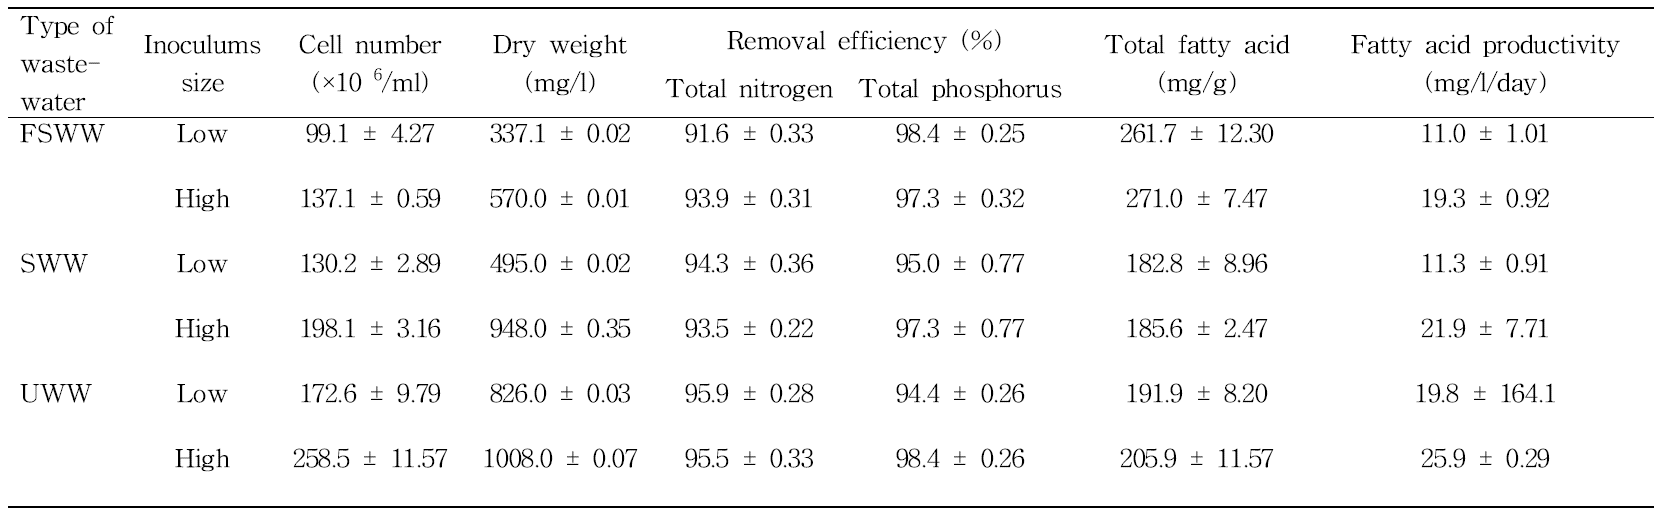 Summary of the results of C. vulgaris growth, T-N and T-P removals, and lipid productivity in the different culture conditions using Korean municipal wastewater